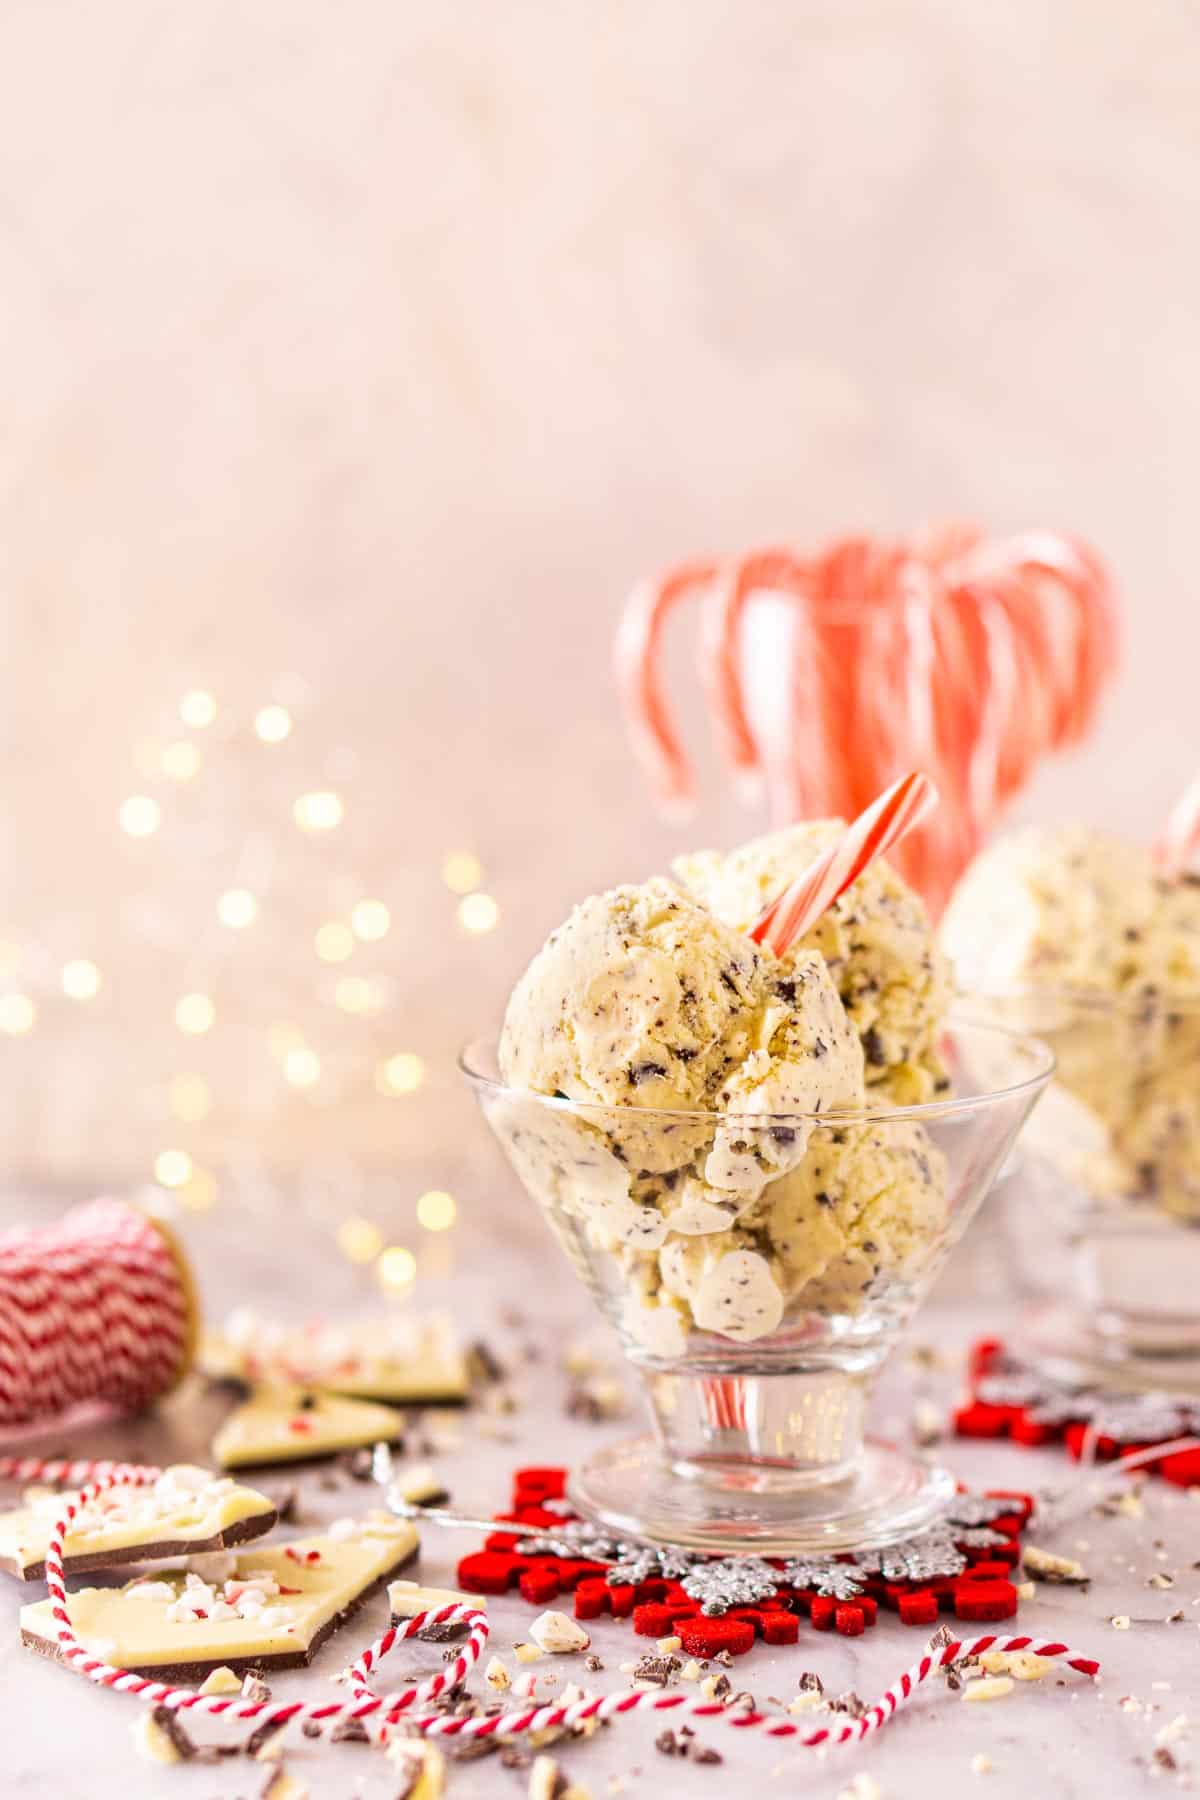 A glass dessert cup filled with the peppermint bark ice cream with chopped chocolate and a decorative ribbon around it and lights in the background.